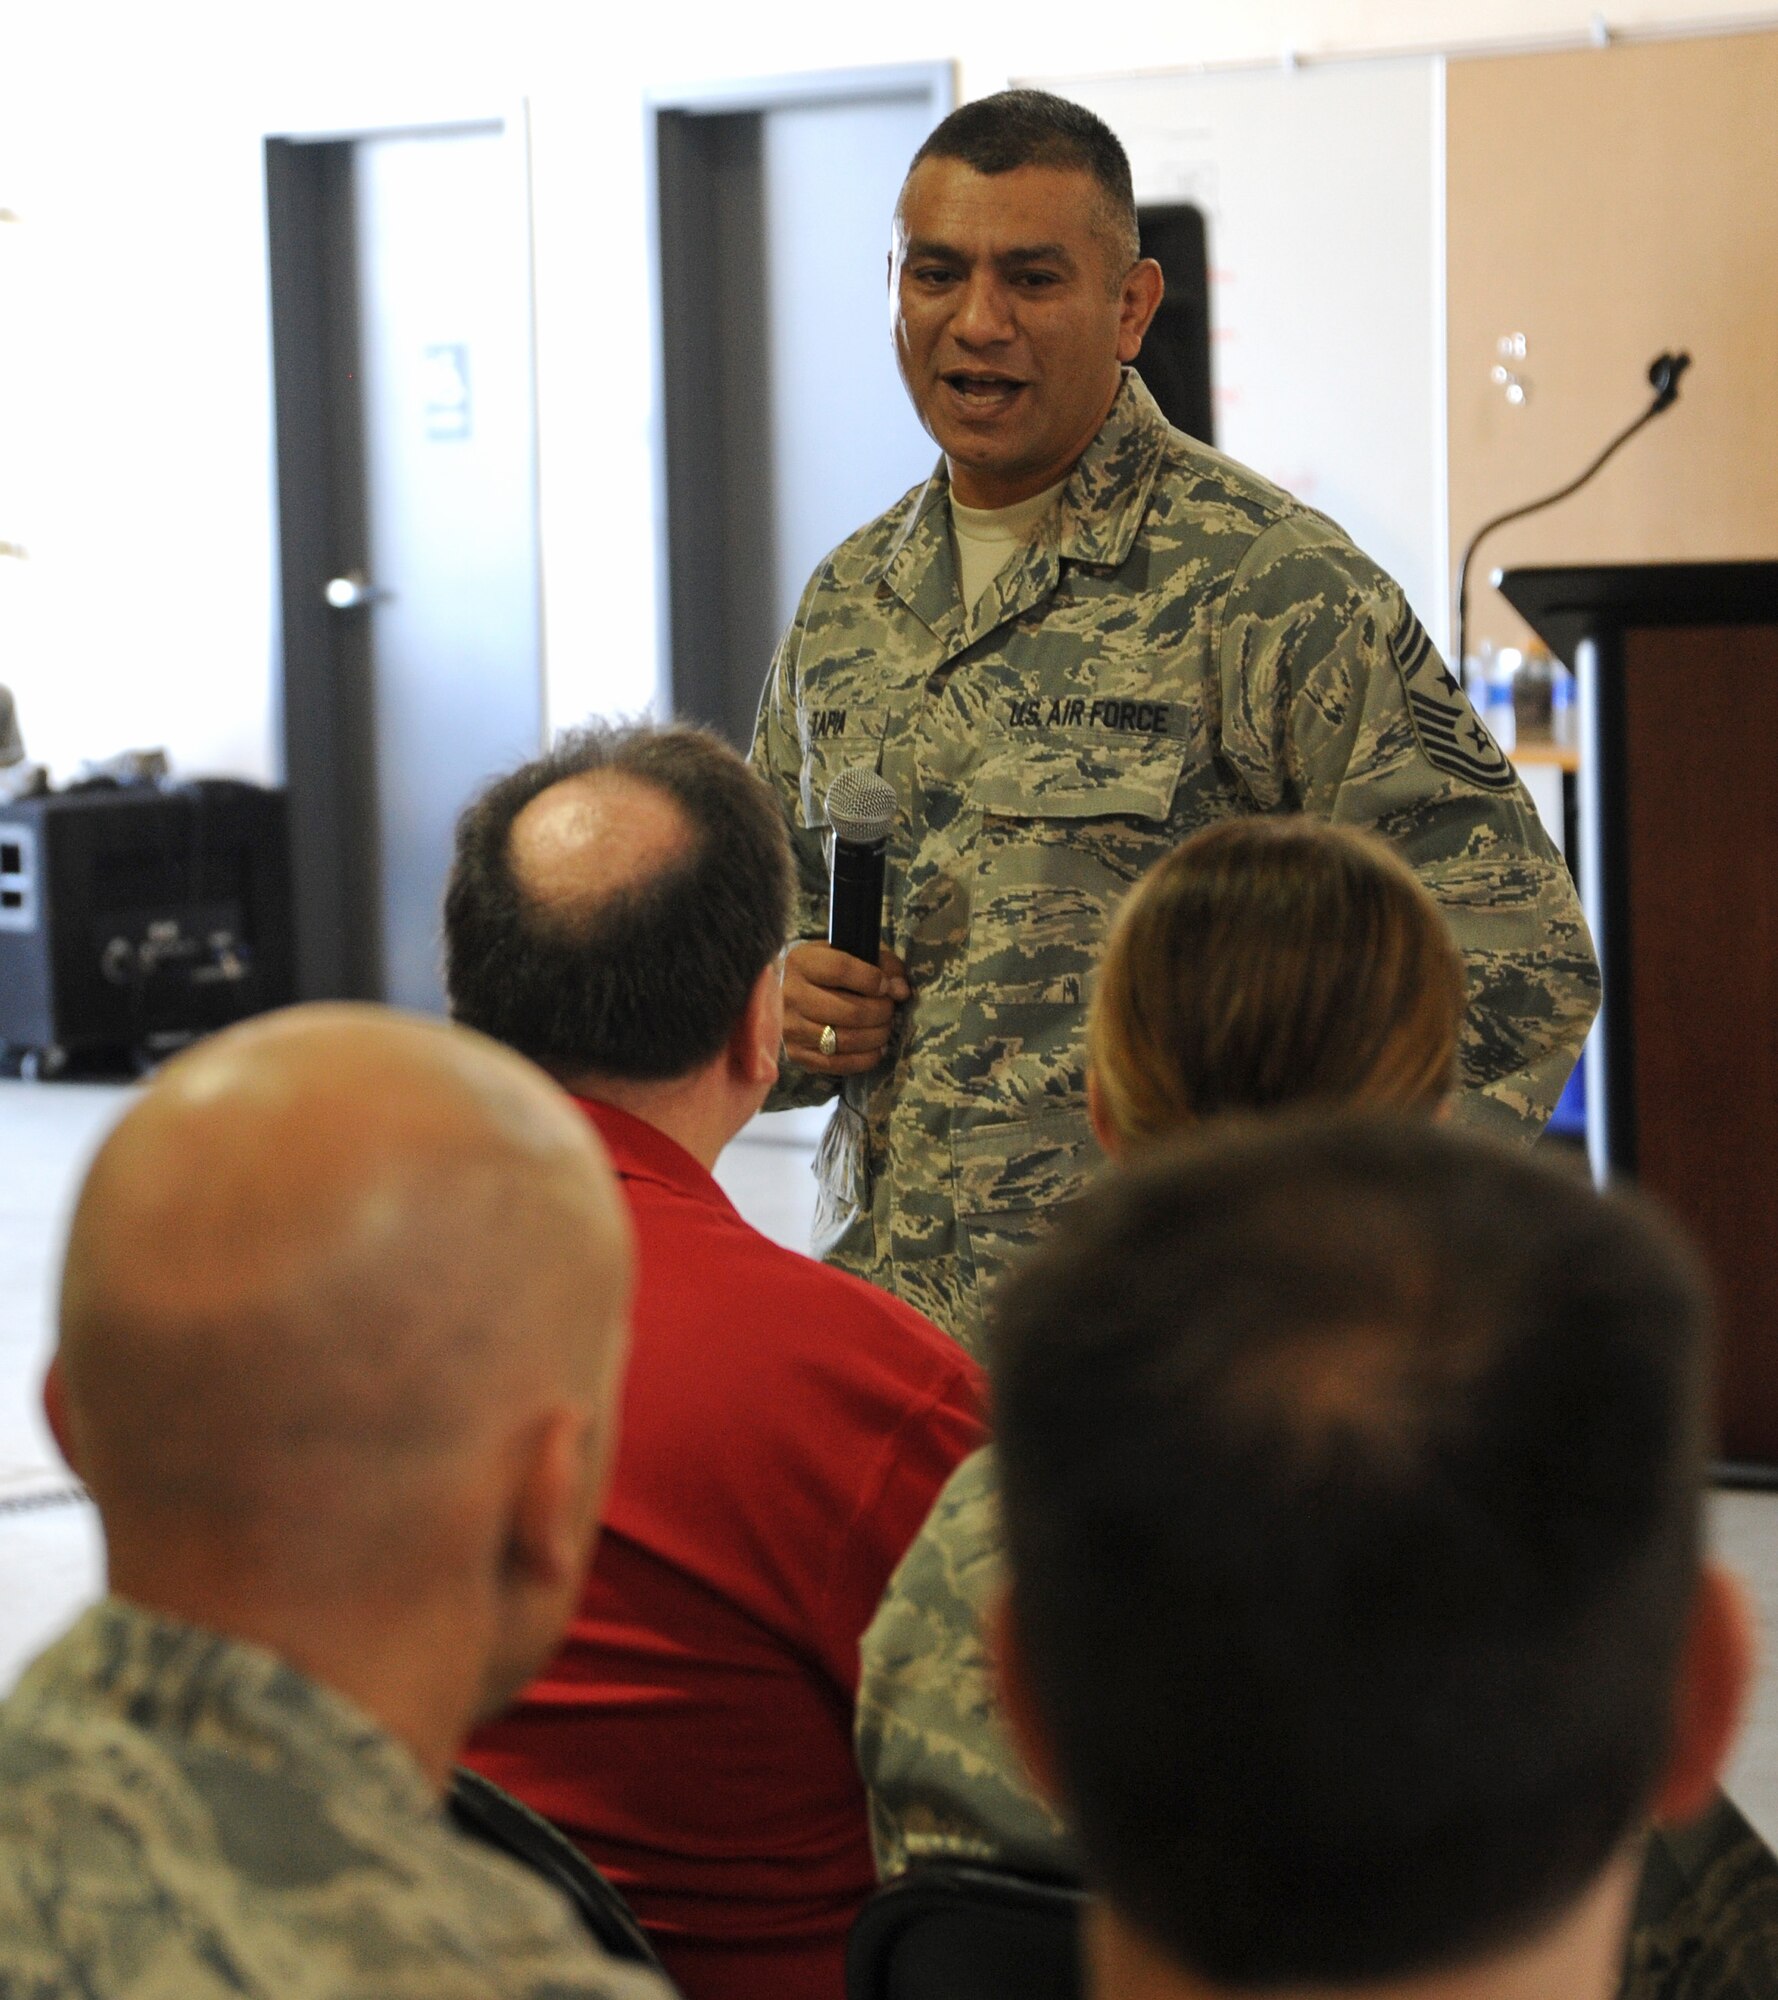 Chief Master Sgt. Gerardo Tapia, command chief of the Air Education and Training Command, speaks to members of the 336th Training Group during a group-wide all-call at the supply warehouse Tuesday, July 2, 2013.  The chief was accompanying Gen. Edward Rice, AETC commander, on a tour of Fairchild Survival, Evasion, Resistance, and Escape facilities.  (U.S. Air Force photo by Staff Sgt. Michael Means/Released)